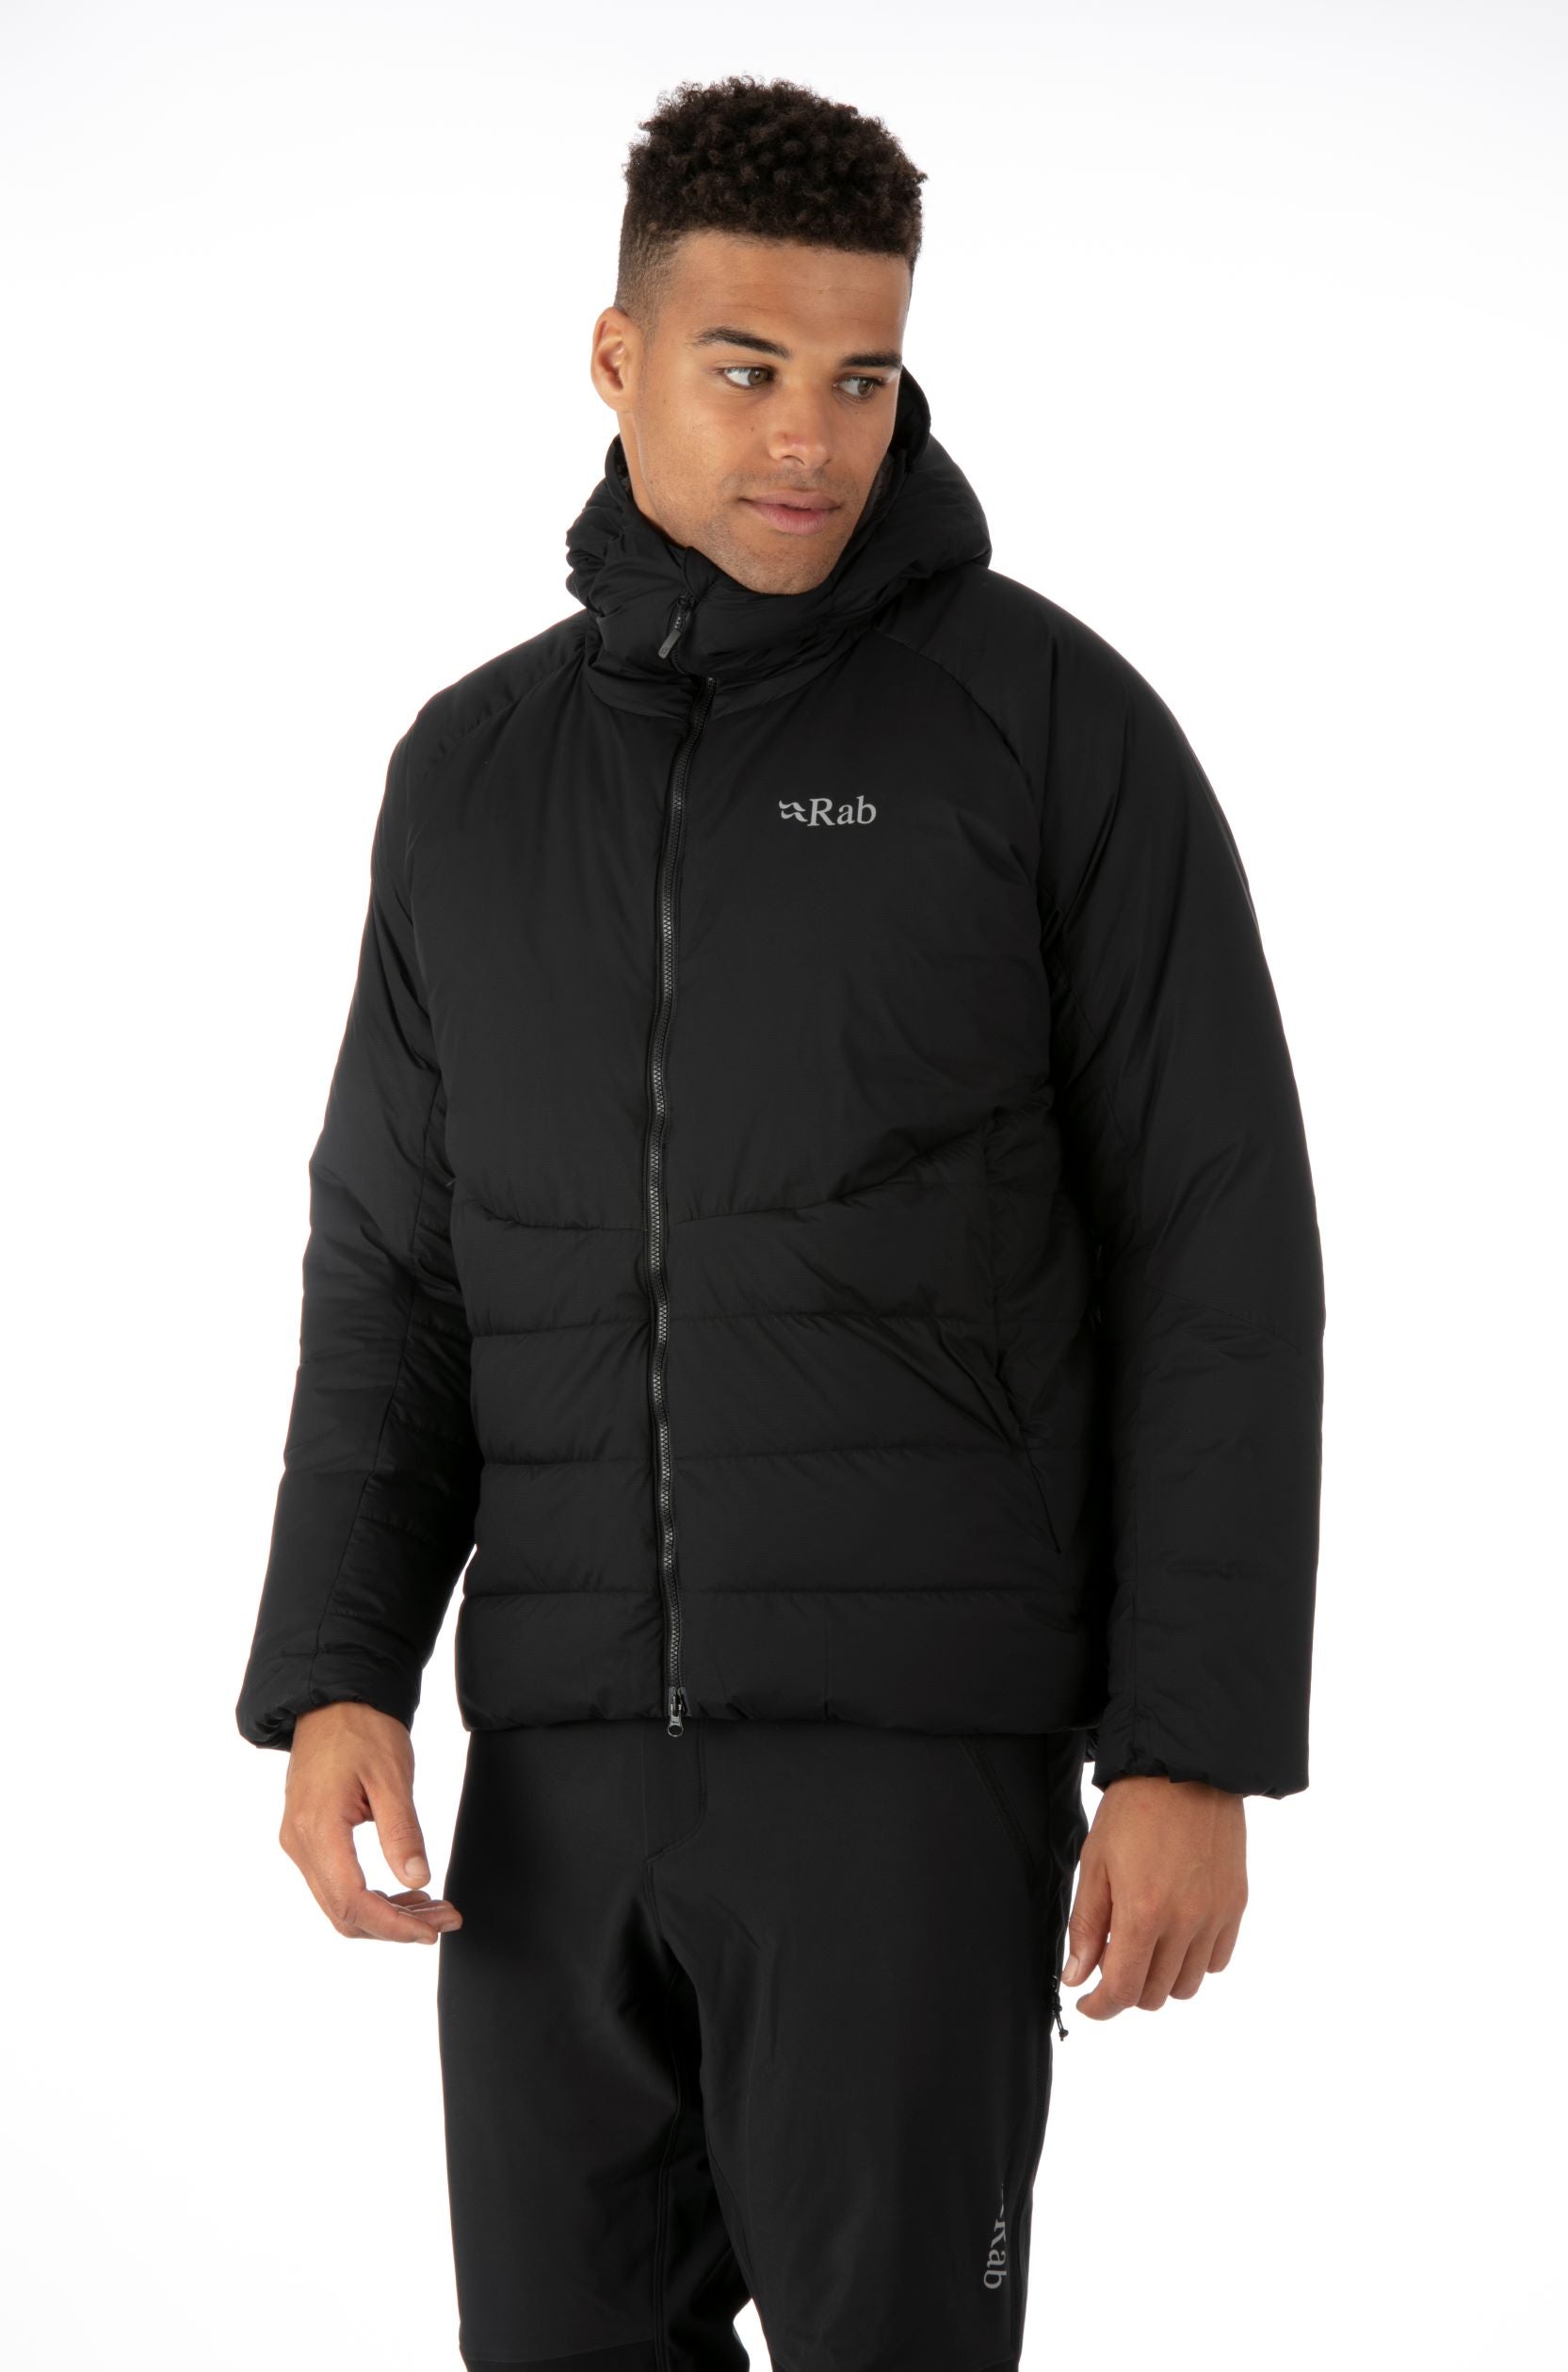 Rab Men's Infinity Light Jacket - Outfitters Store